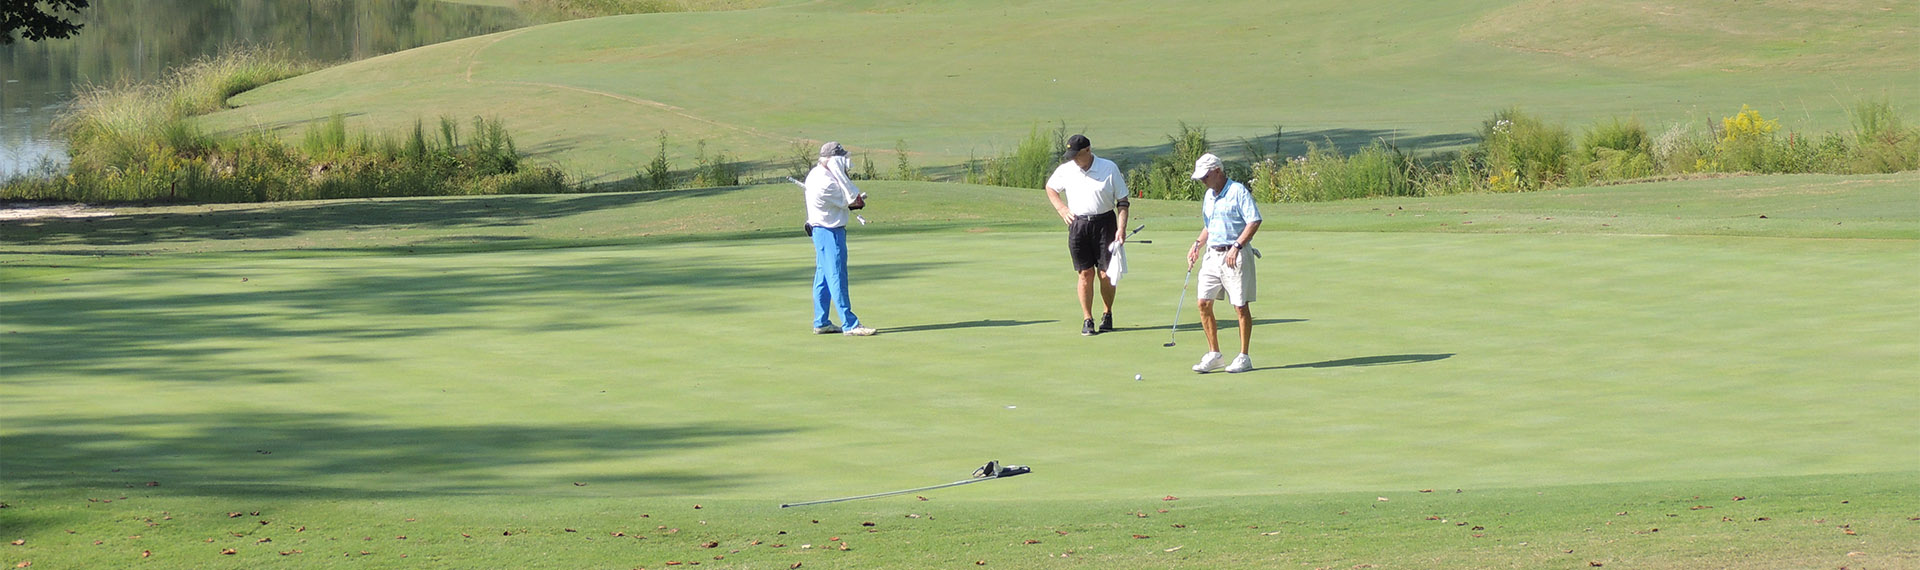 golf players on golf course